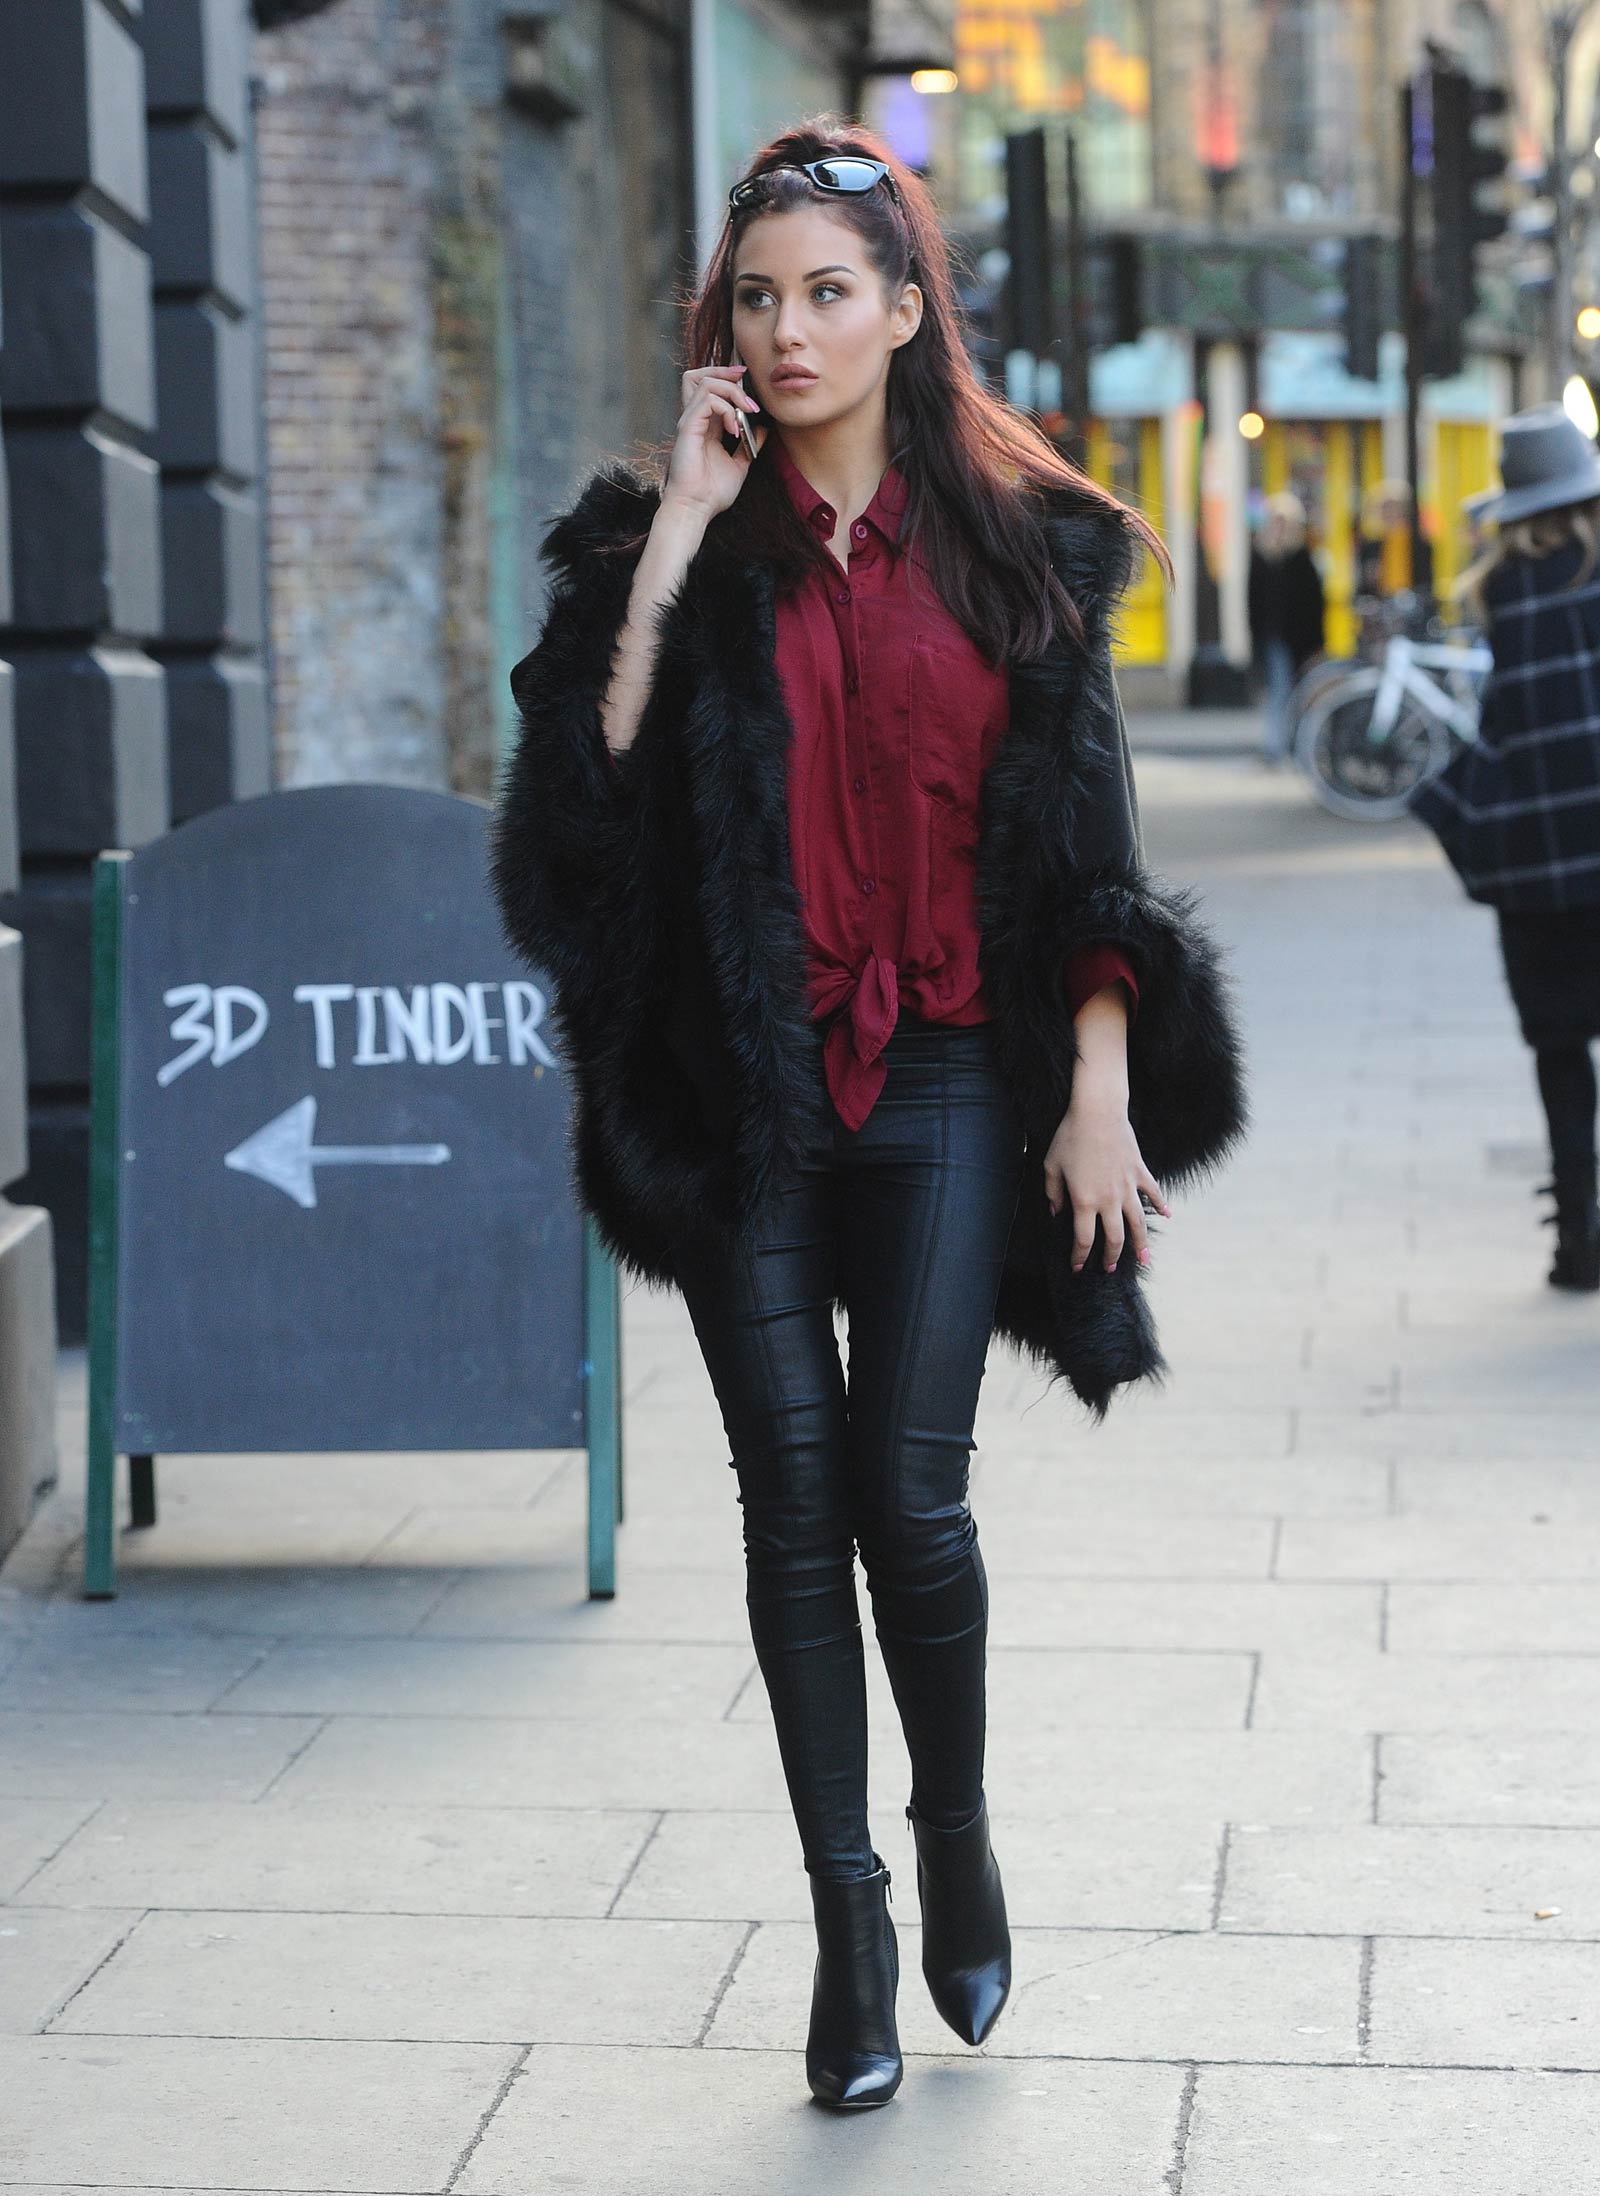 Chloe Goodman out and about in London